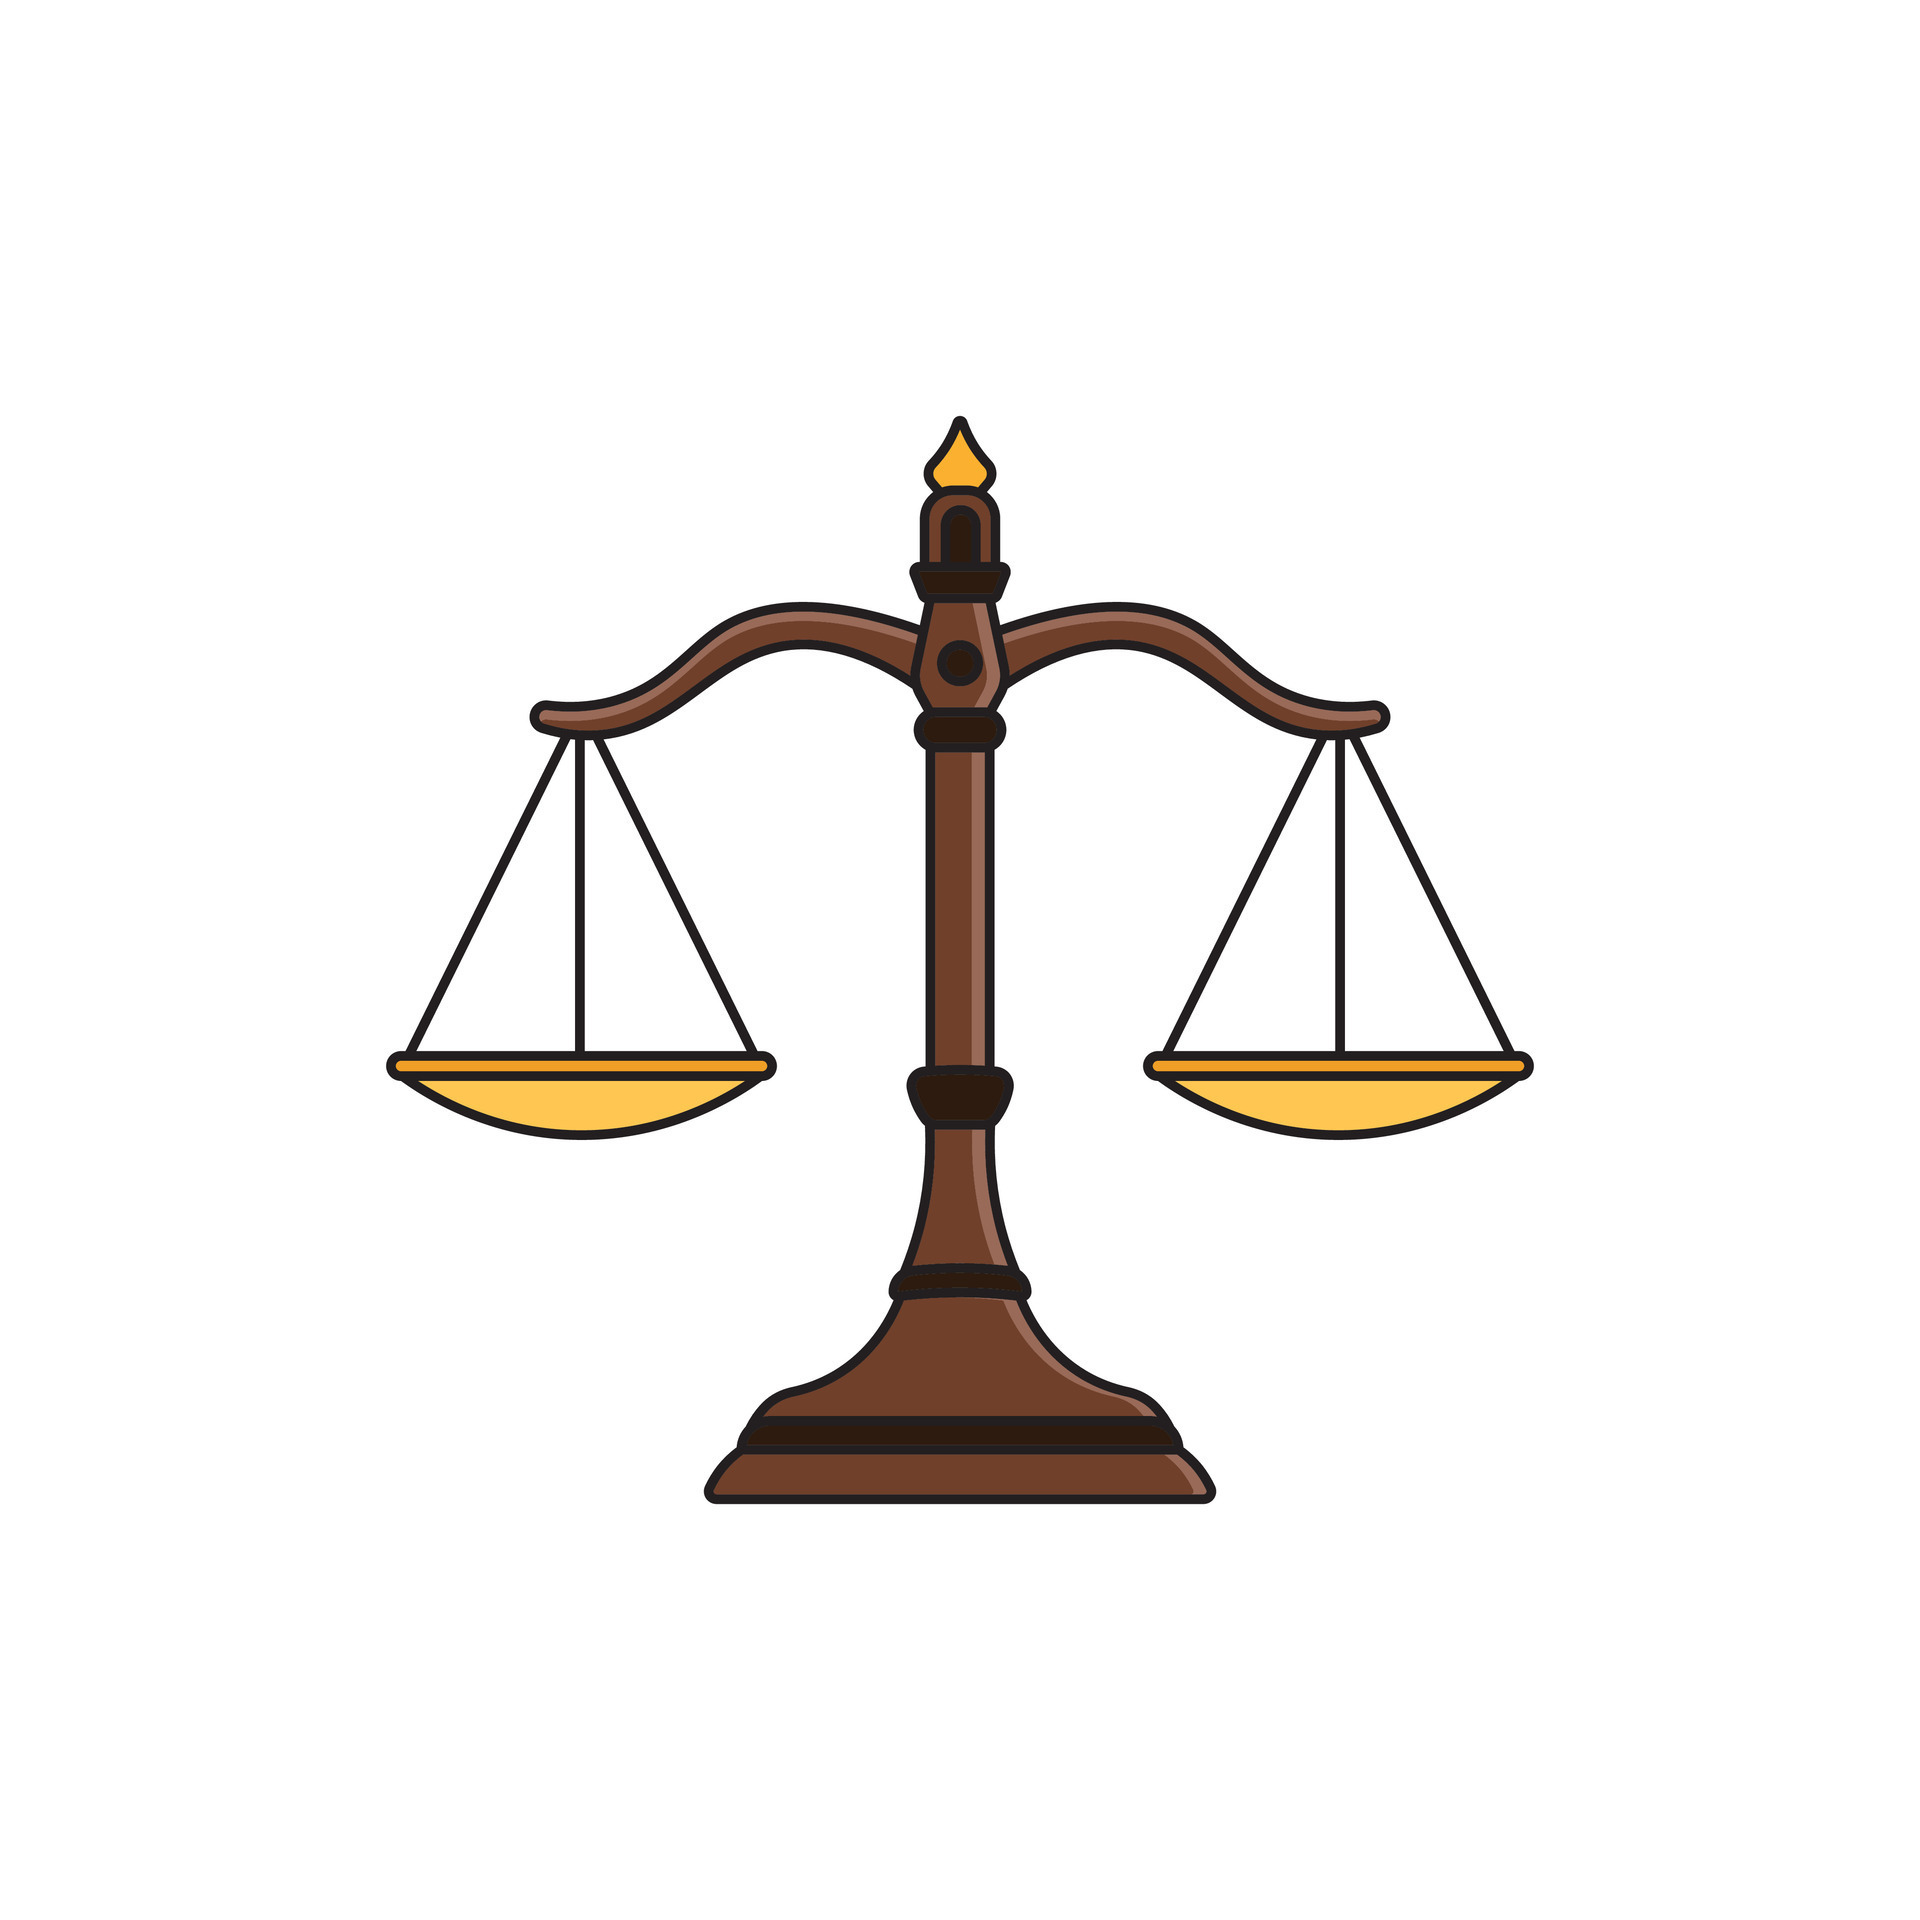 https://static.vecteezy.com/system/resources/previews/025/433/016/original/kids-drawing-illustration-justice-scales-weight-balance-flat-cartoon-isolated-vector.jpg